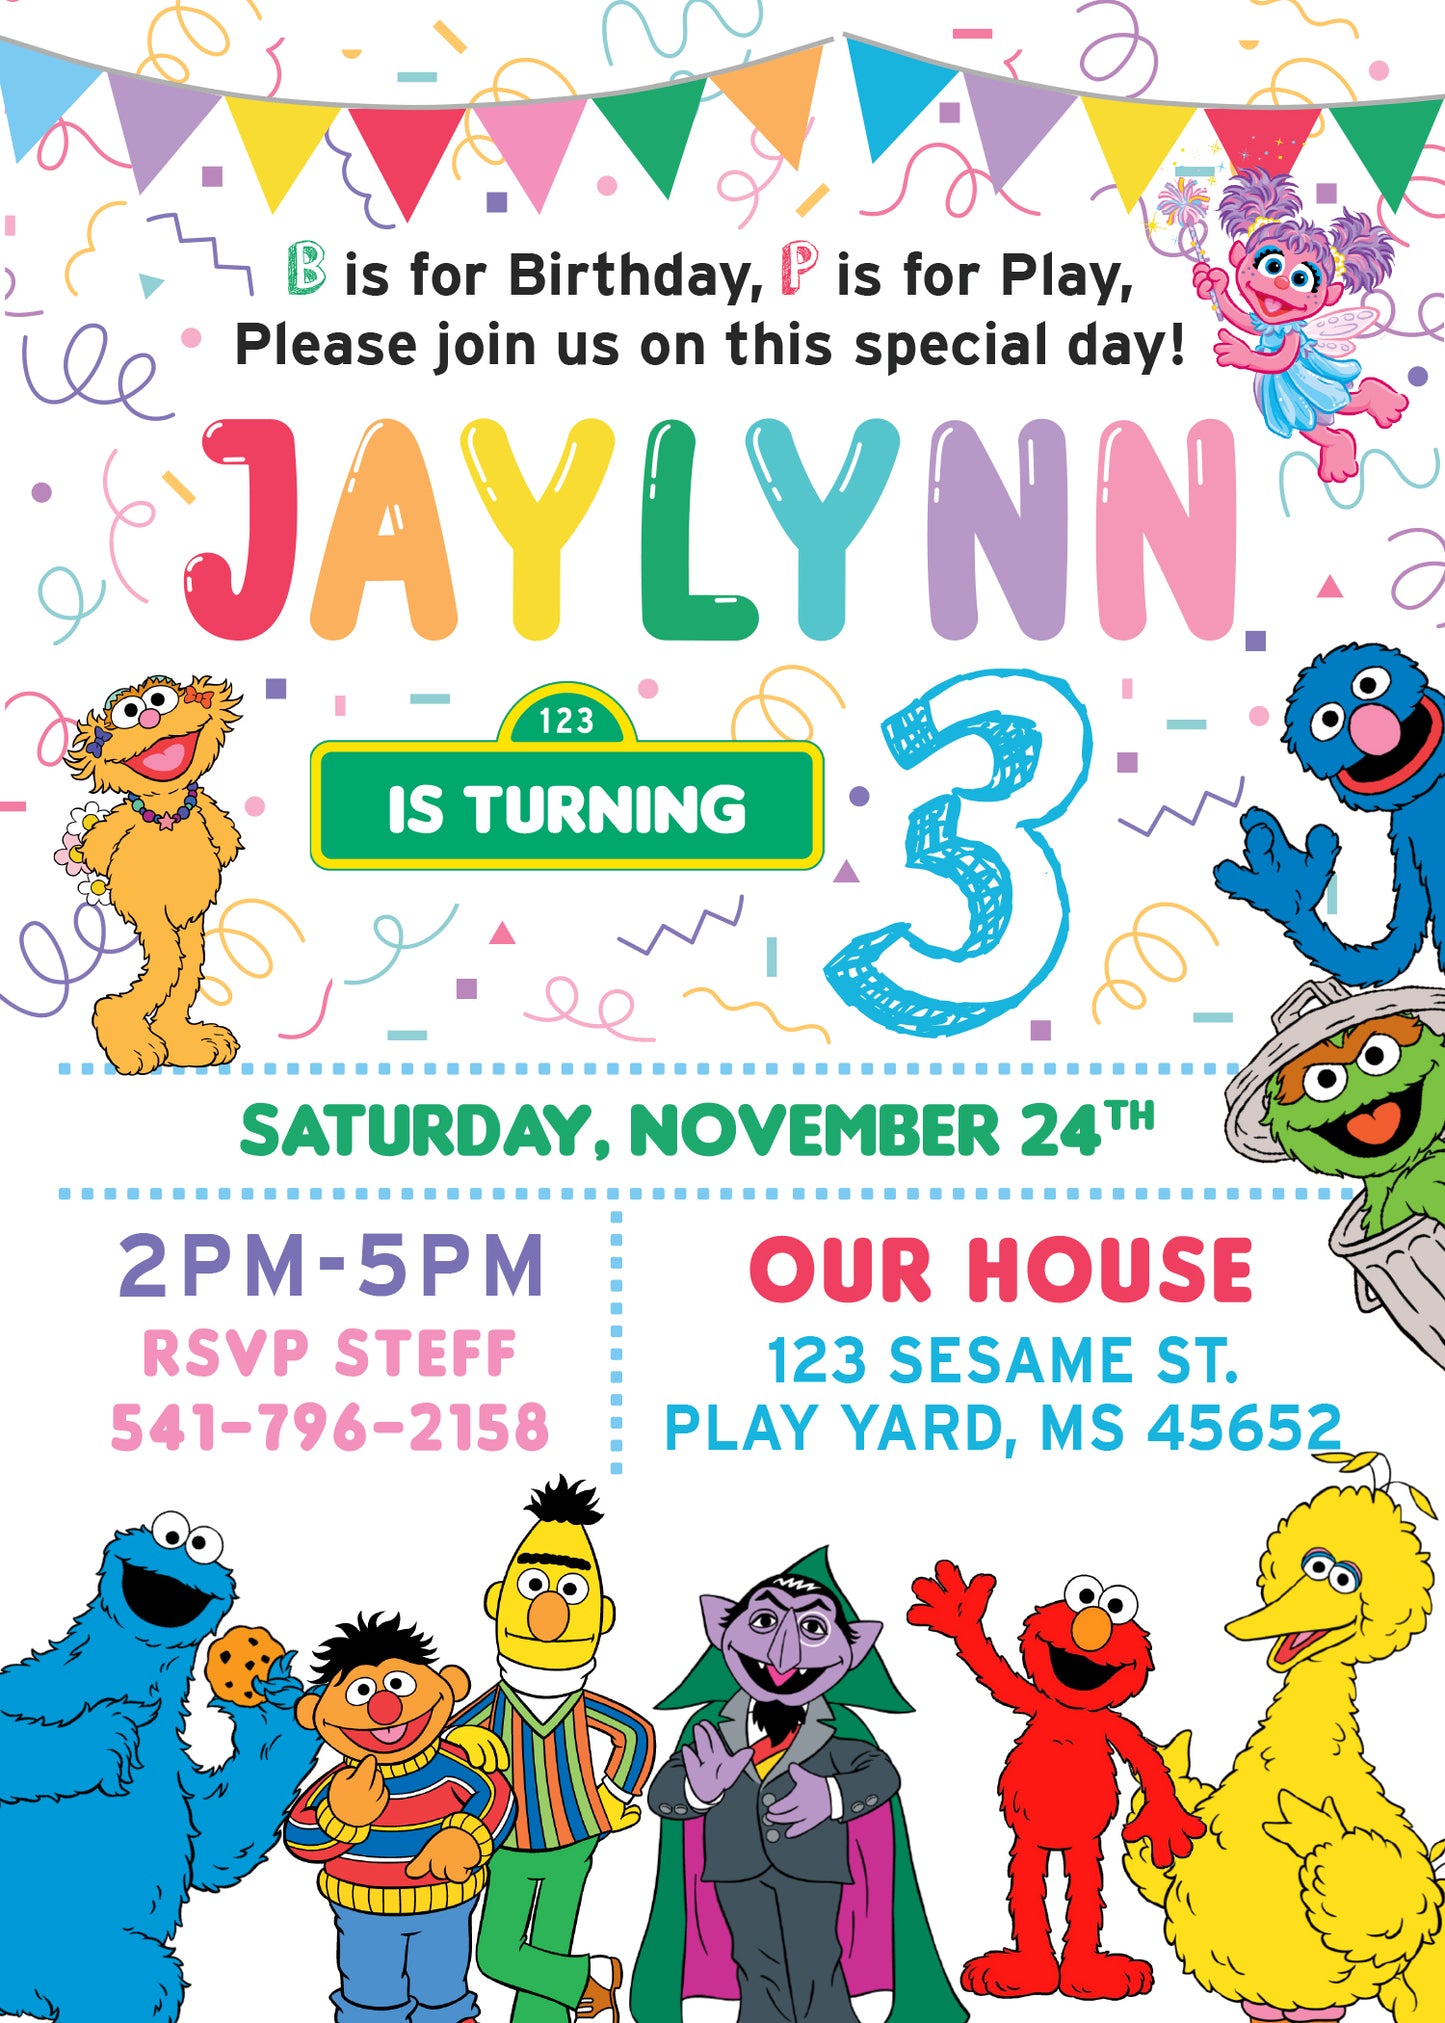 SESAME STREET Birthday Party Invitation with or without Photo! Big Bird and Elmo - Printed or Digital!